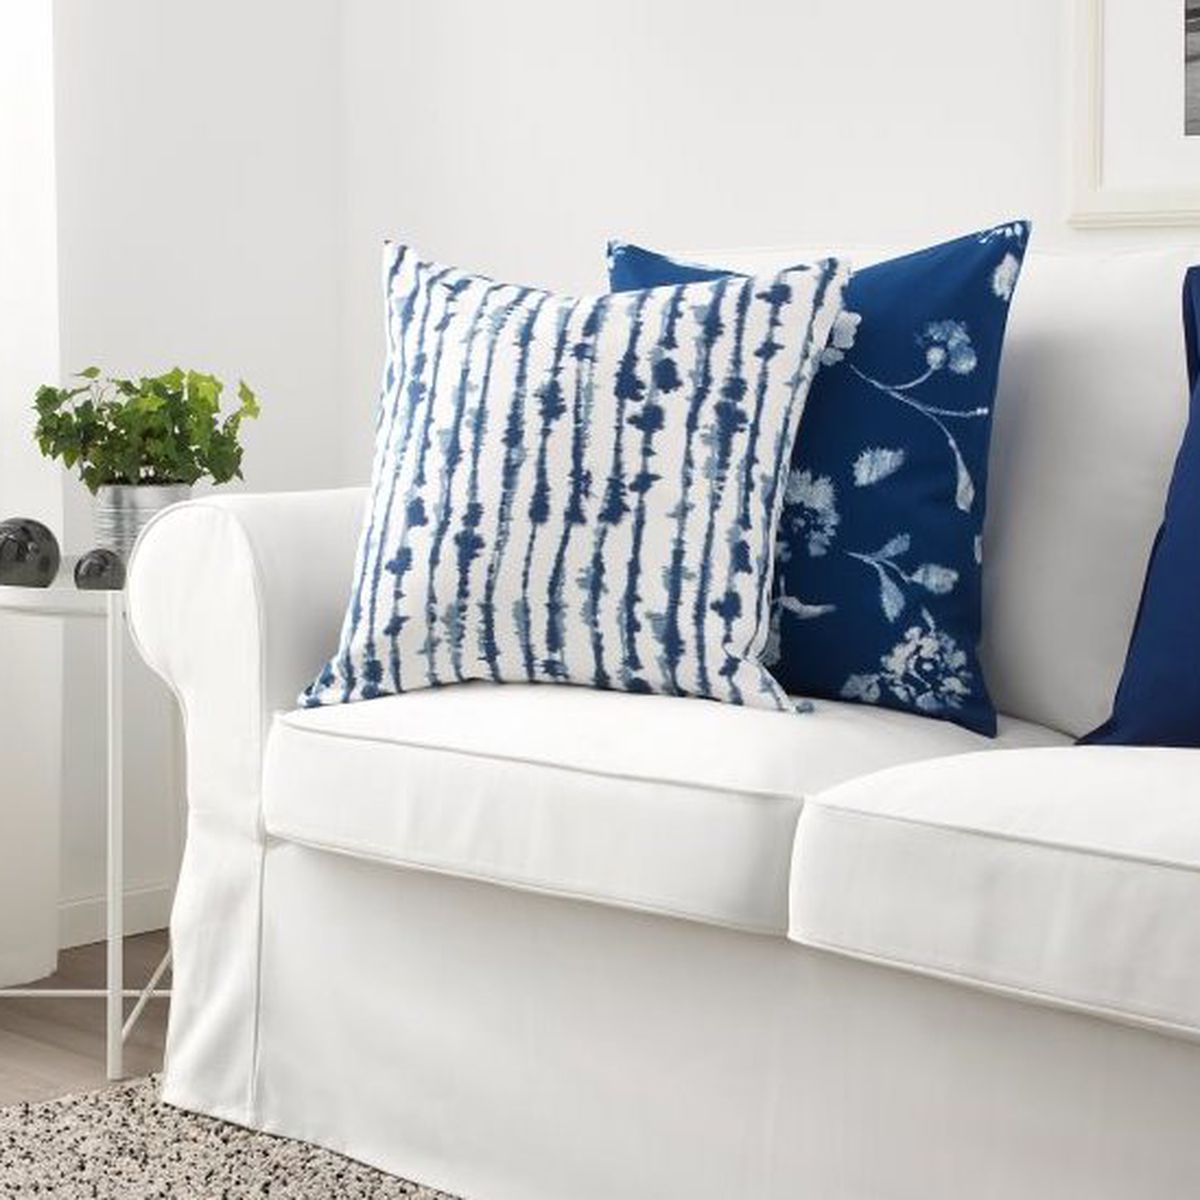 Blue and white pillows sit on a white couch. 